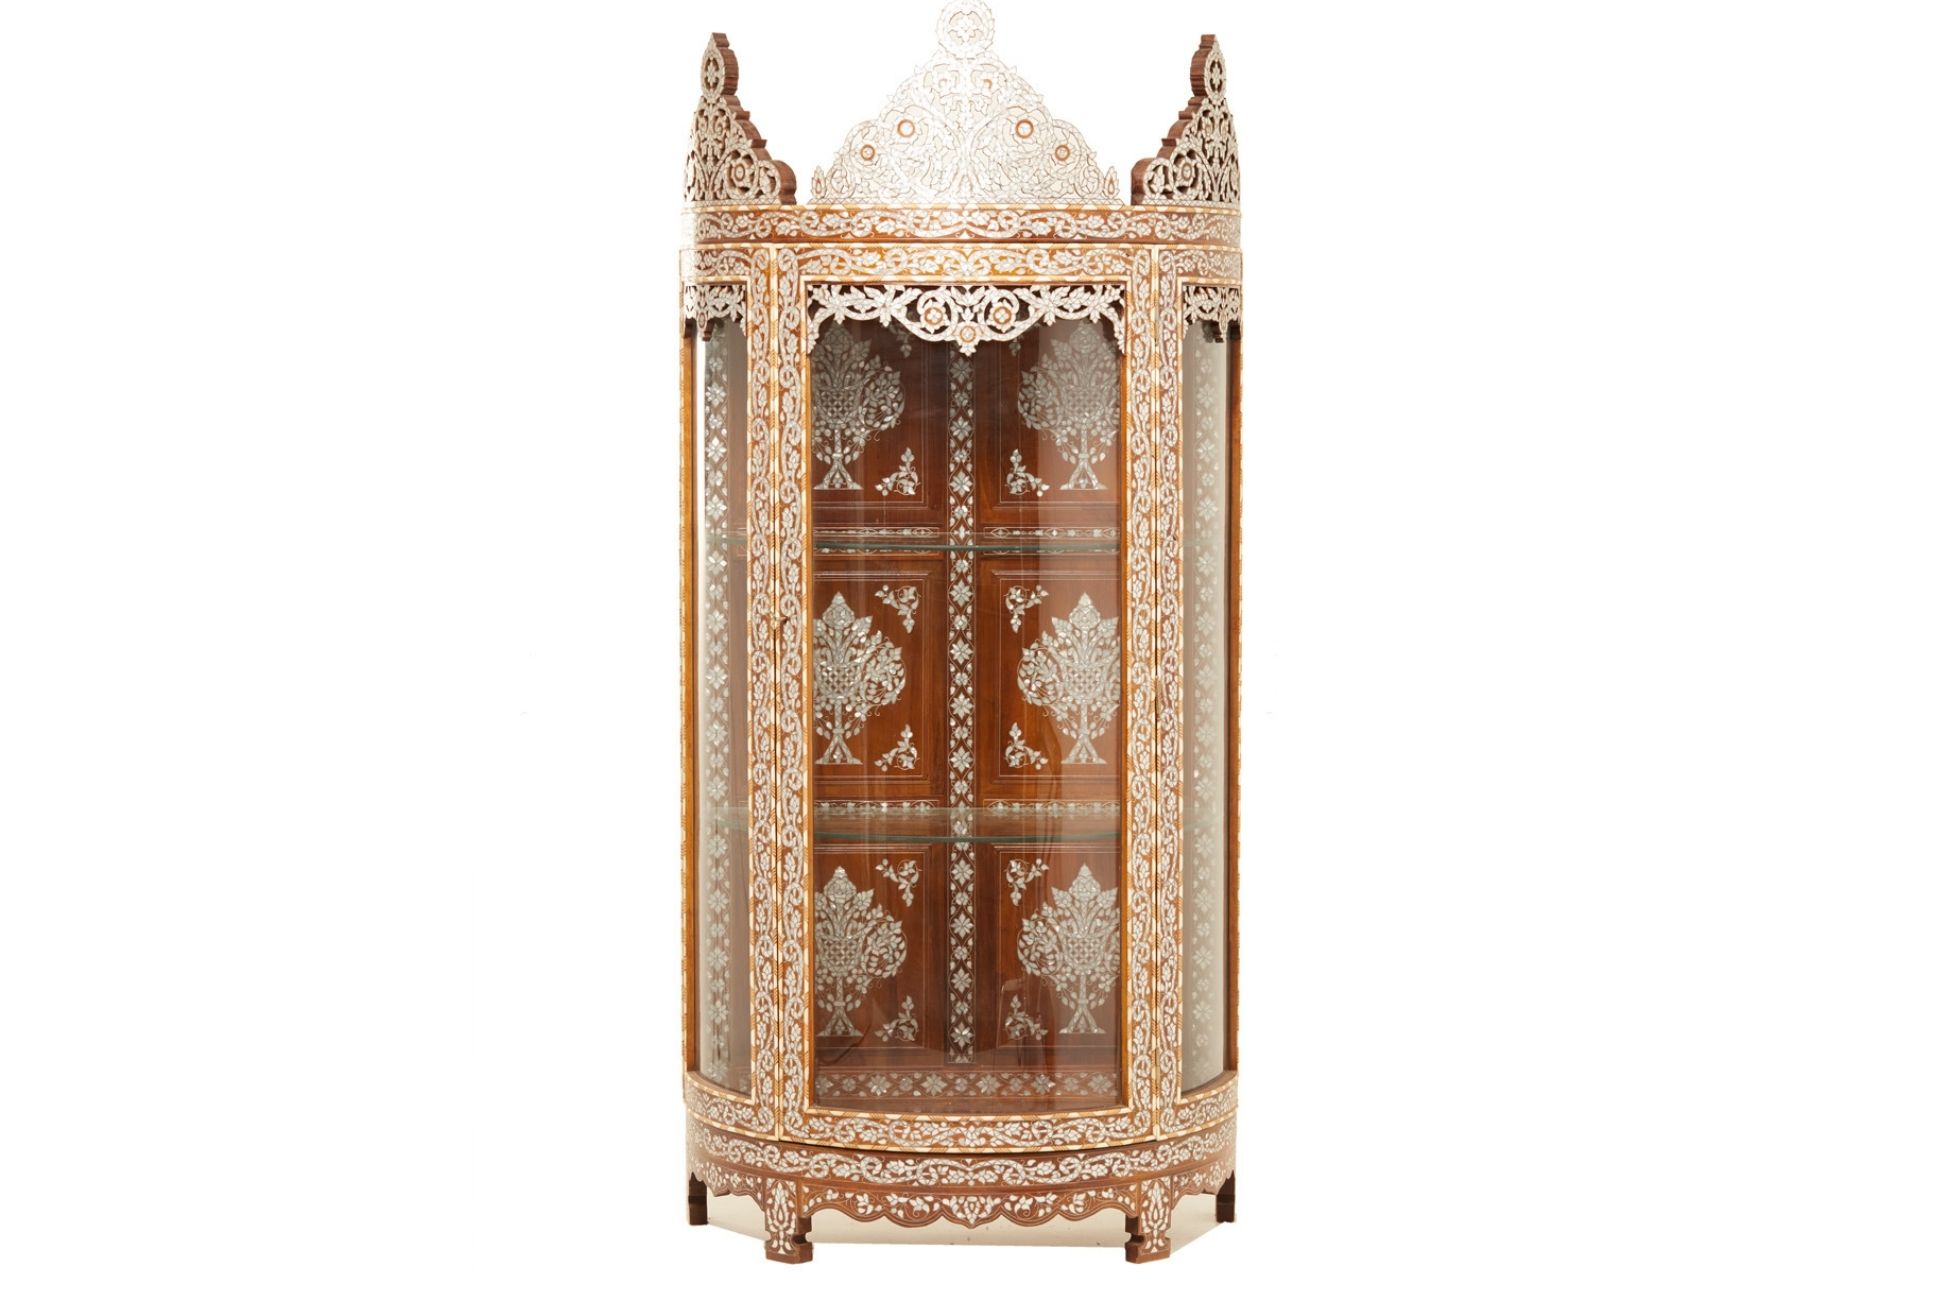 A SYRIAN MOTHER OF PEARL AND BONE INLAID DISPLAY CABINET (1)